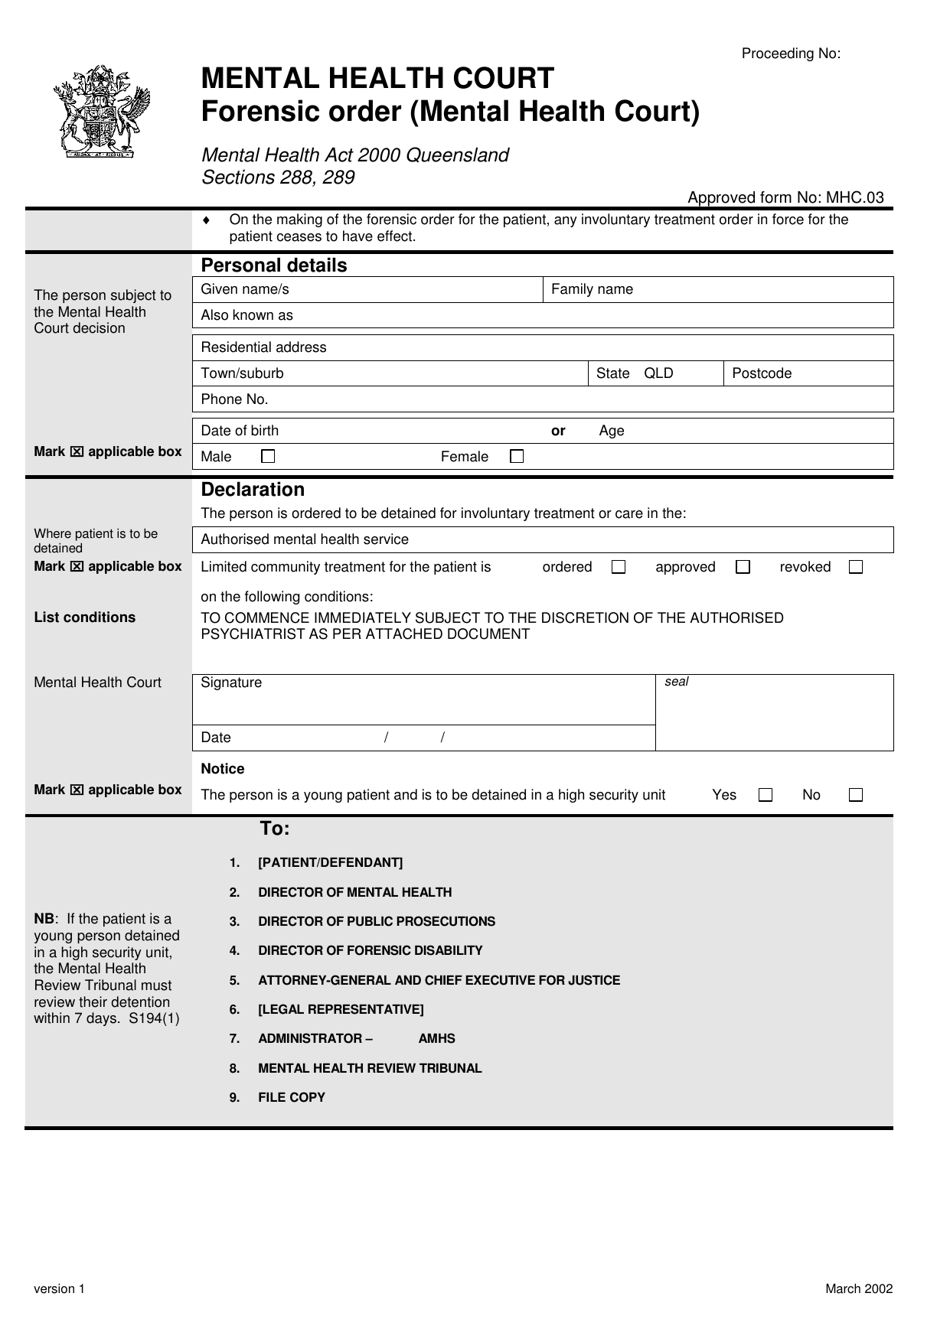 Form MHC.03 Forensic Order (Mental Health Court) - Queensland, Australia, Page 1